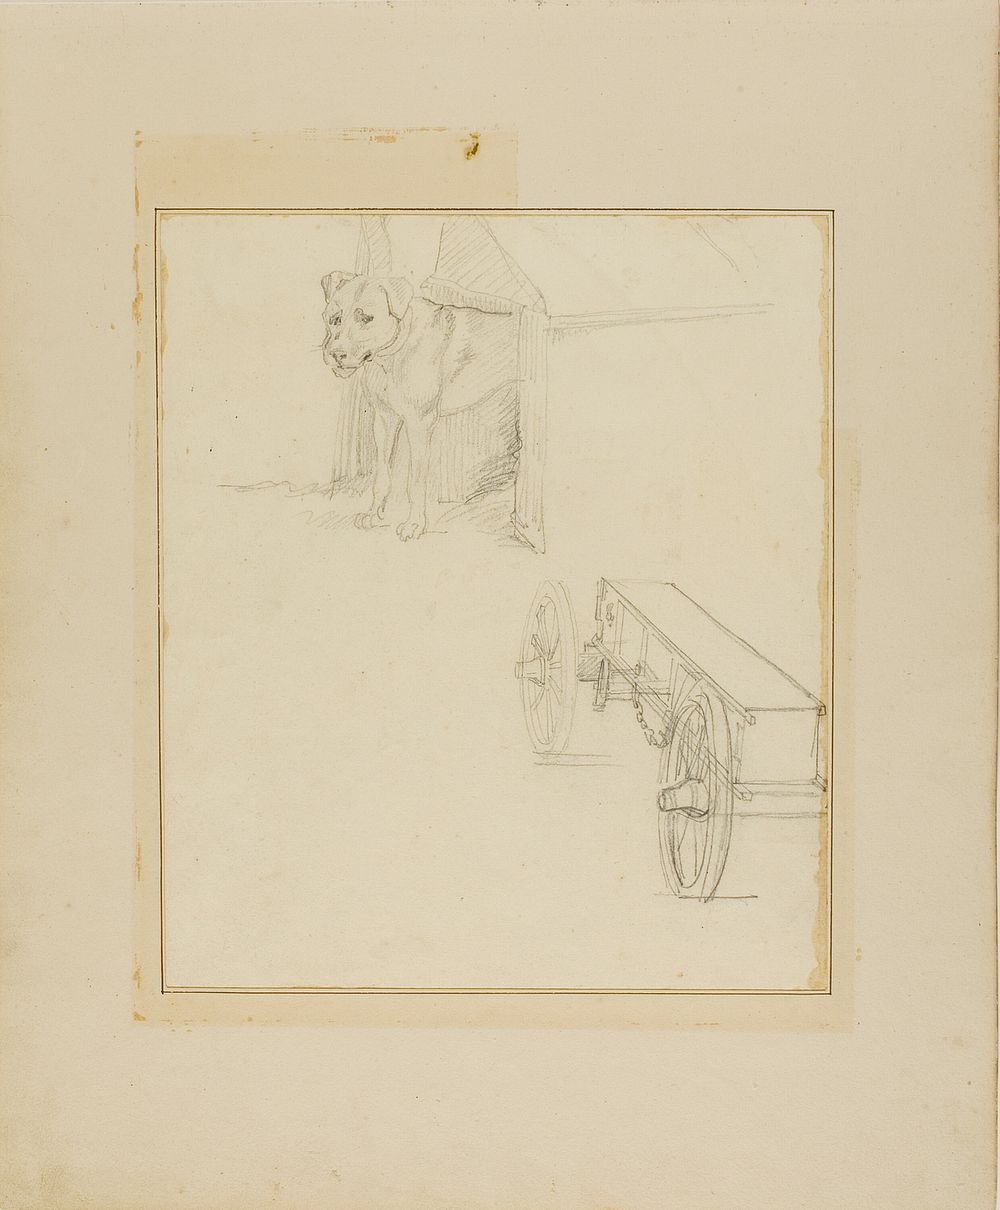 Dog Standing in Dog House and Study of a Munitions Cart by Jean Louis André Théodore Géricault